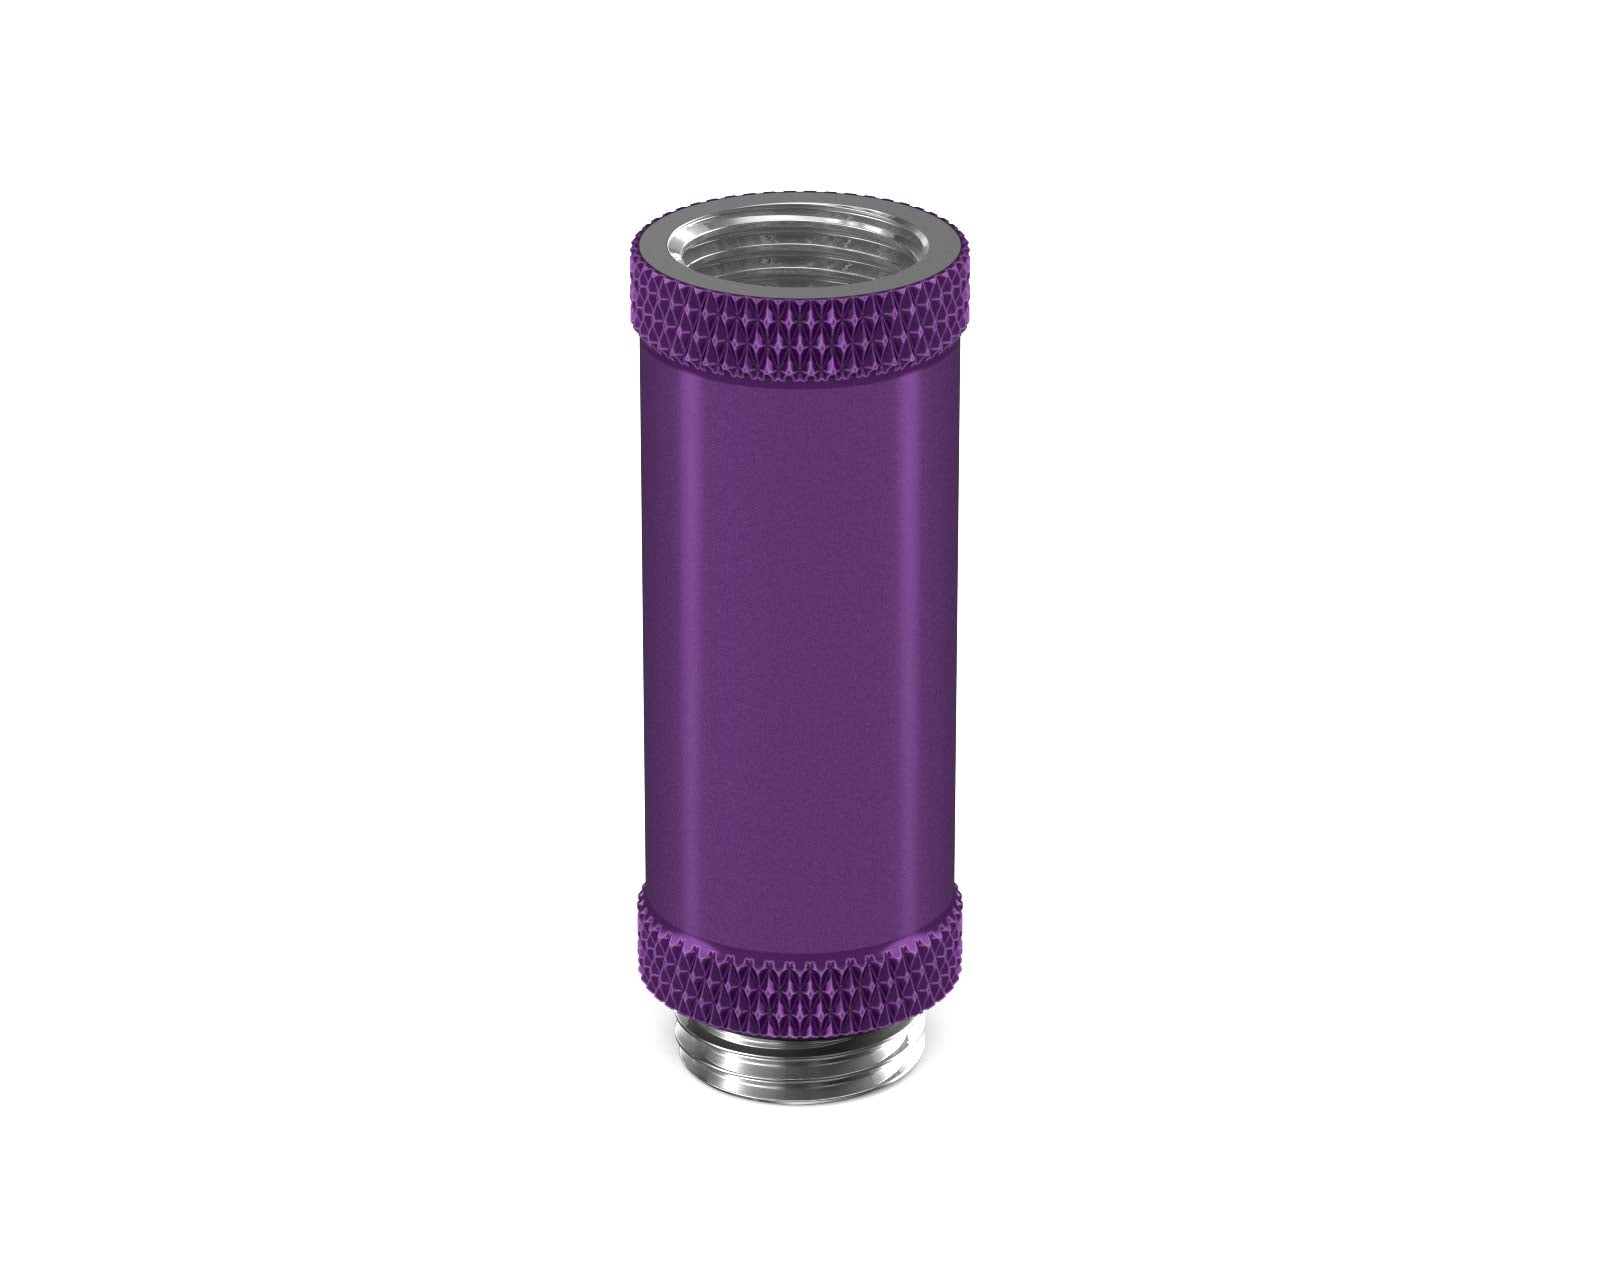 PrimoChill Male to Female G 1/4in. 40mm SX Extension Coupler - PrimoChill - KEEPING IT COOL Candy Purple